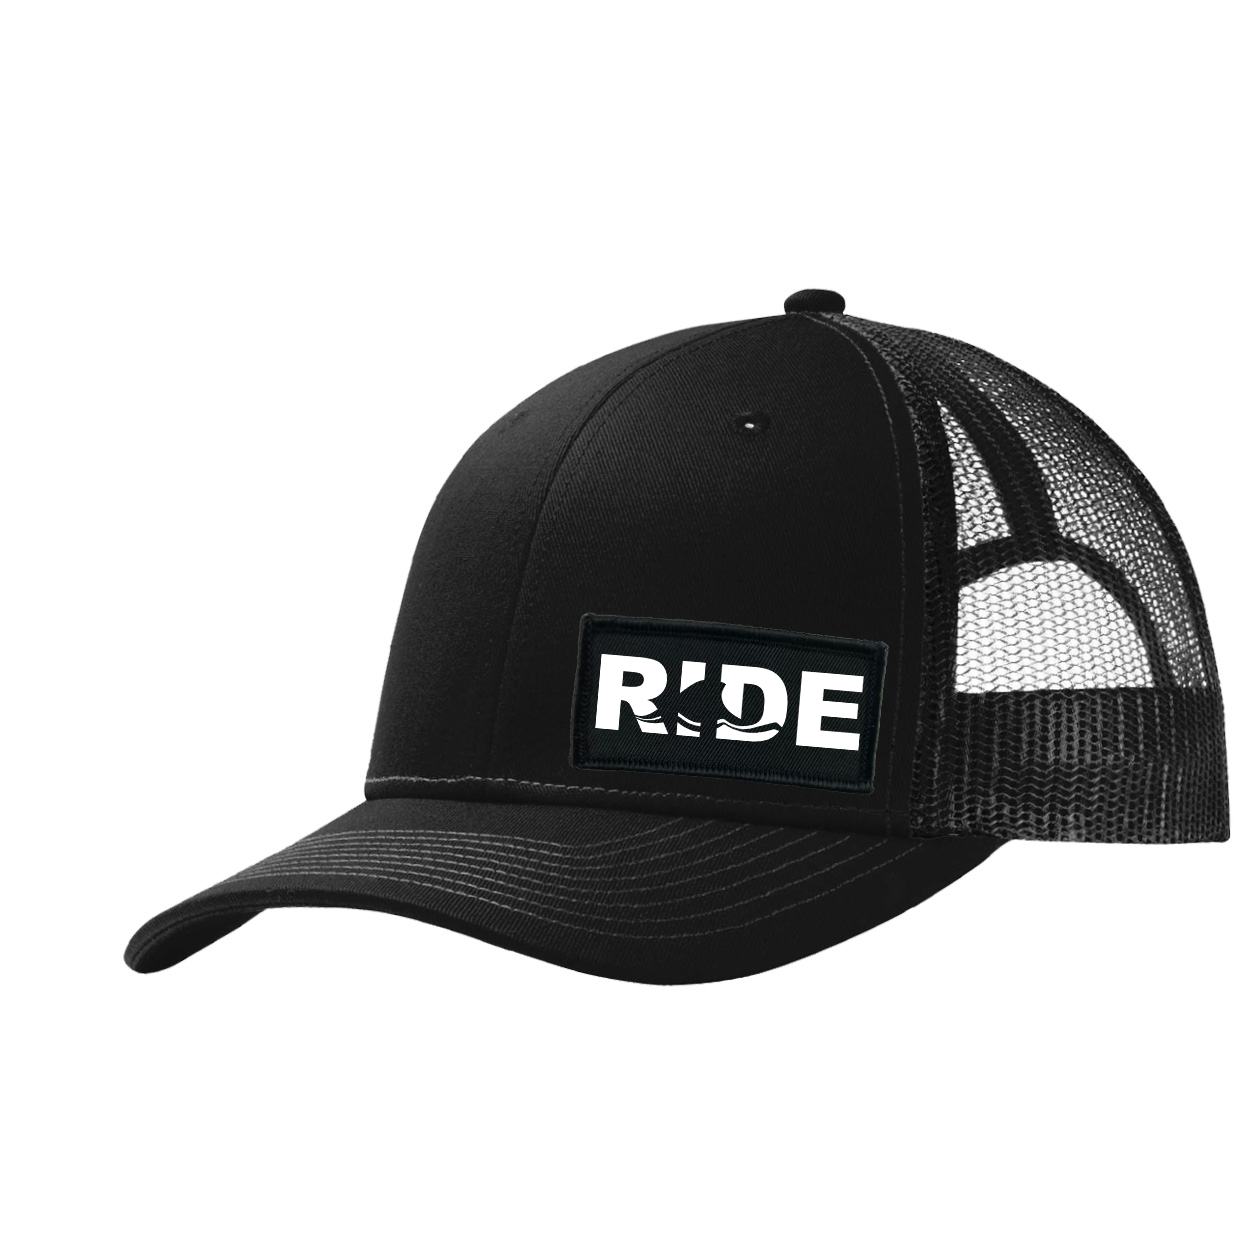 Ride Wave Logo Night Out Woven Patch Snapback Trucker Hat Black (White Logo)